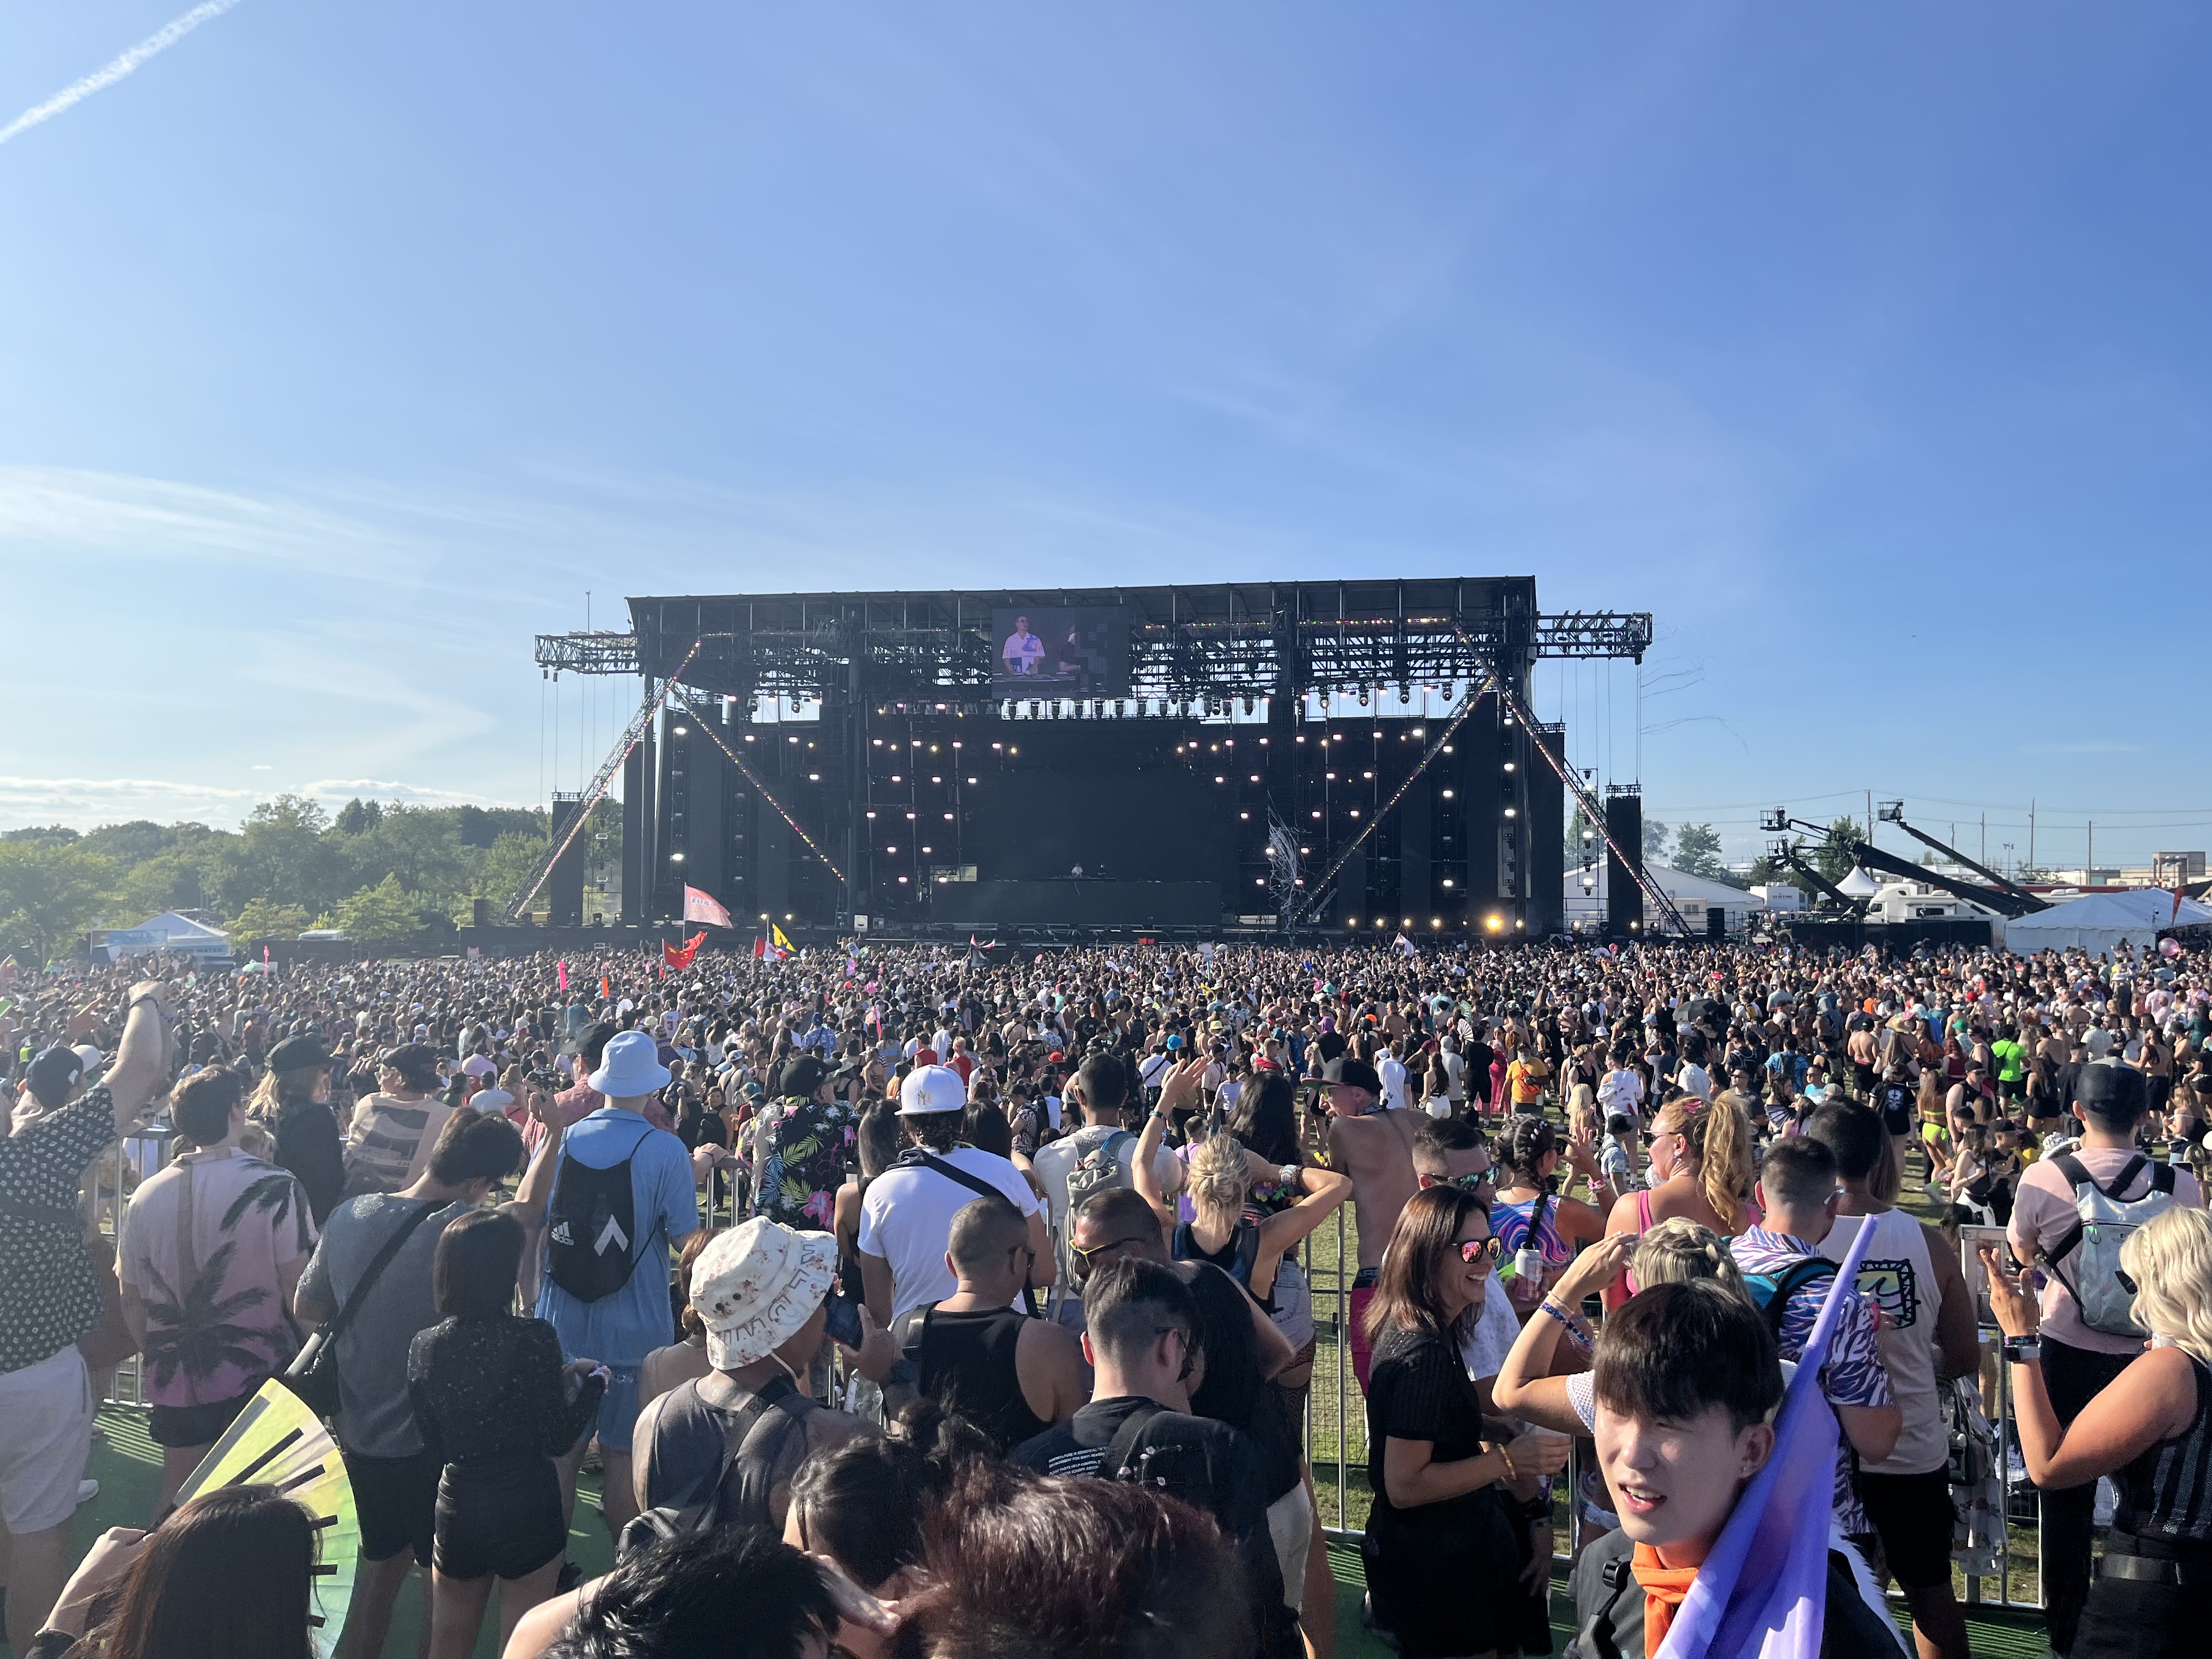 Crowd at VELD in Toronto at Downsview Park